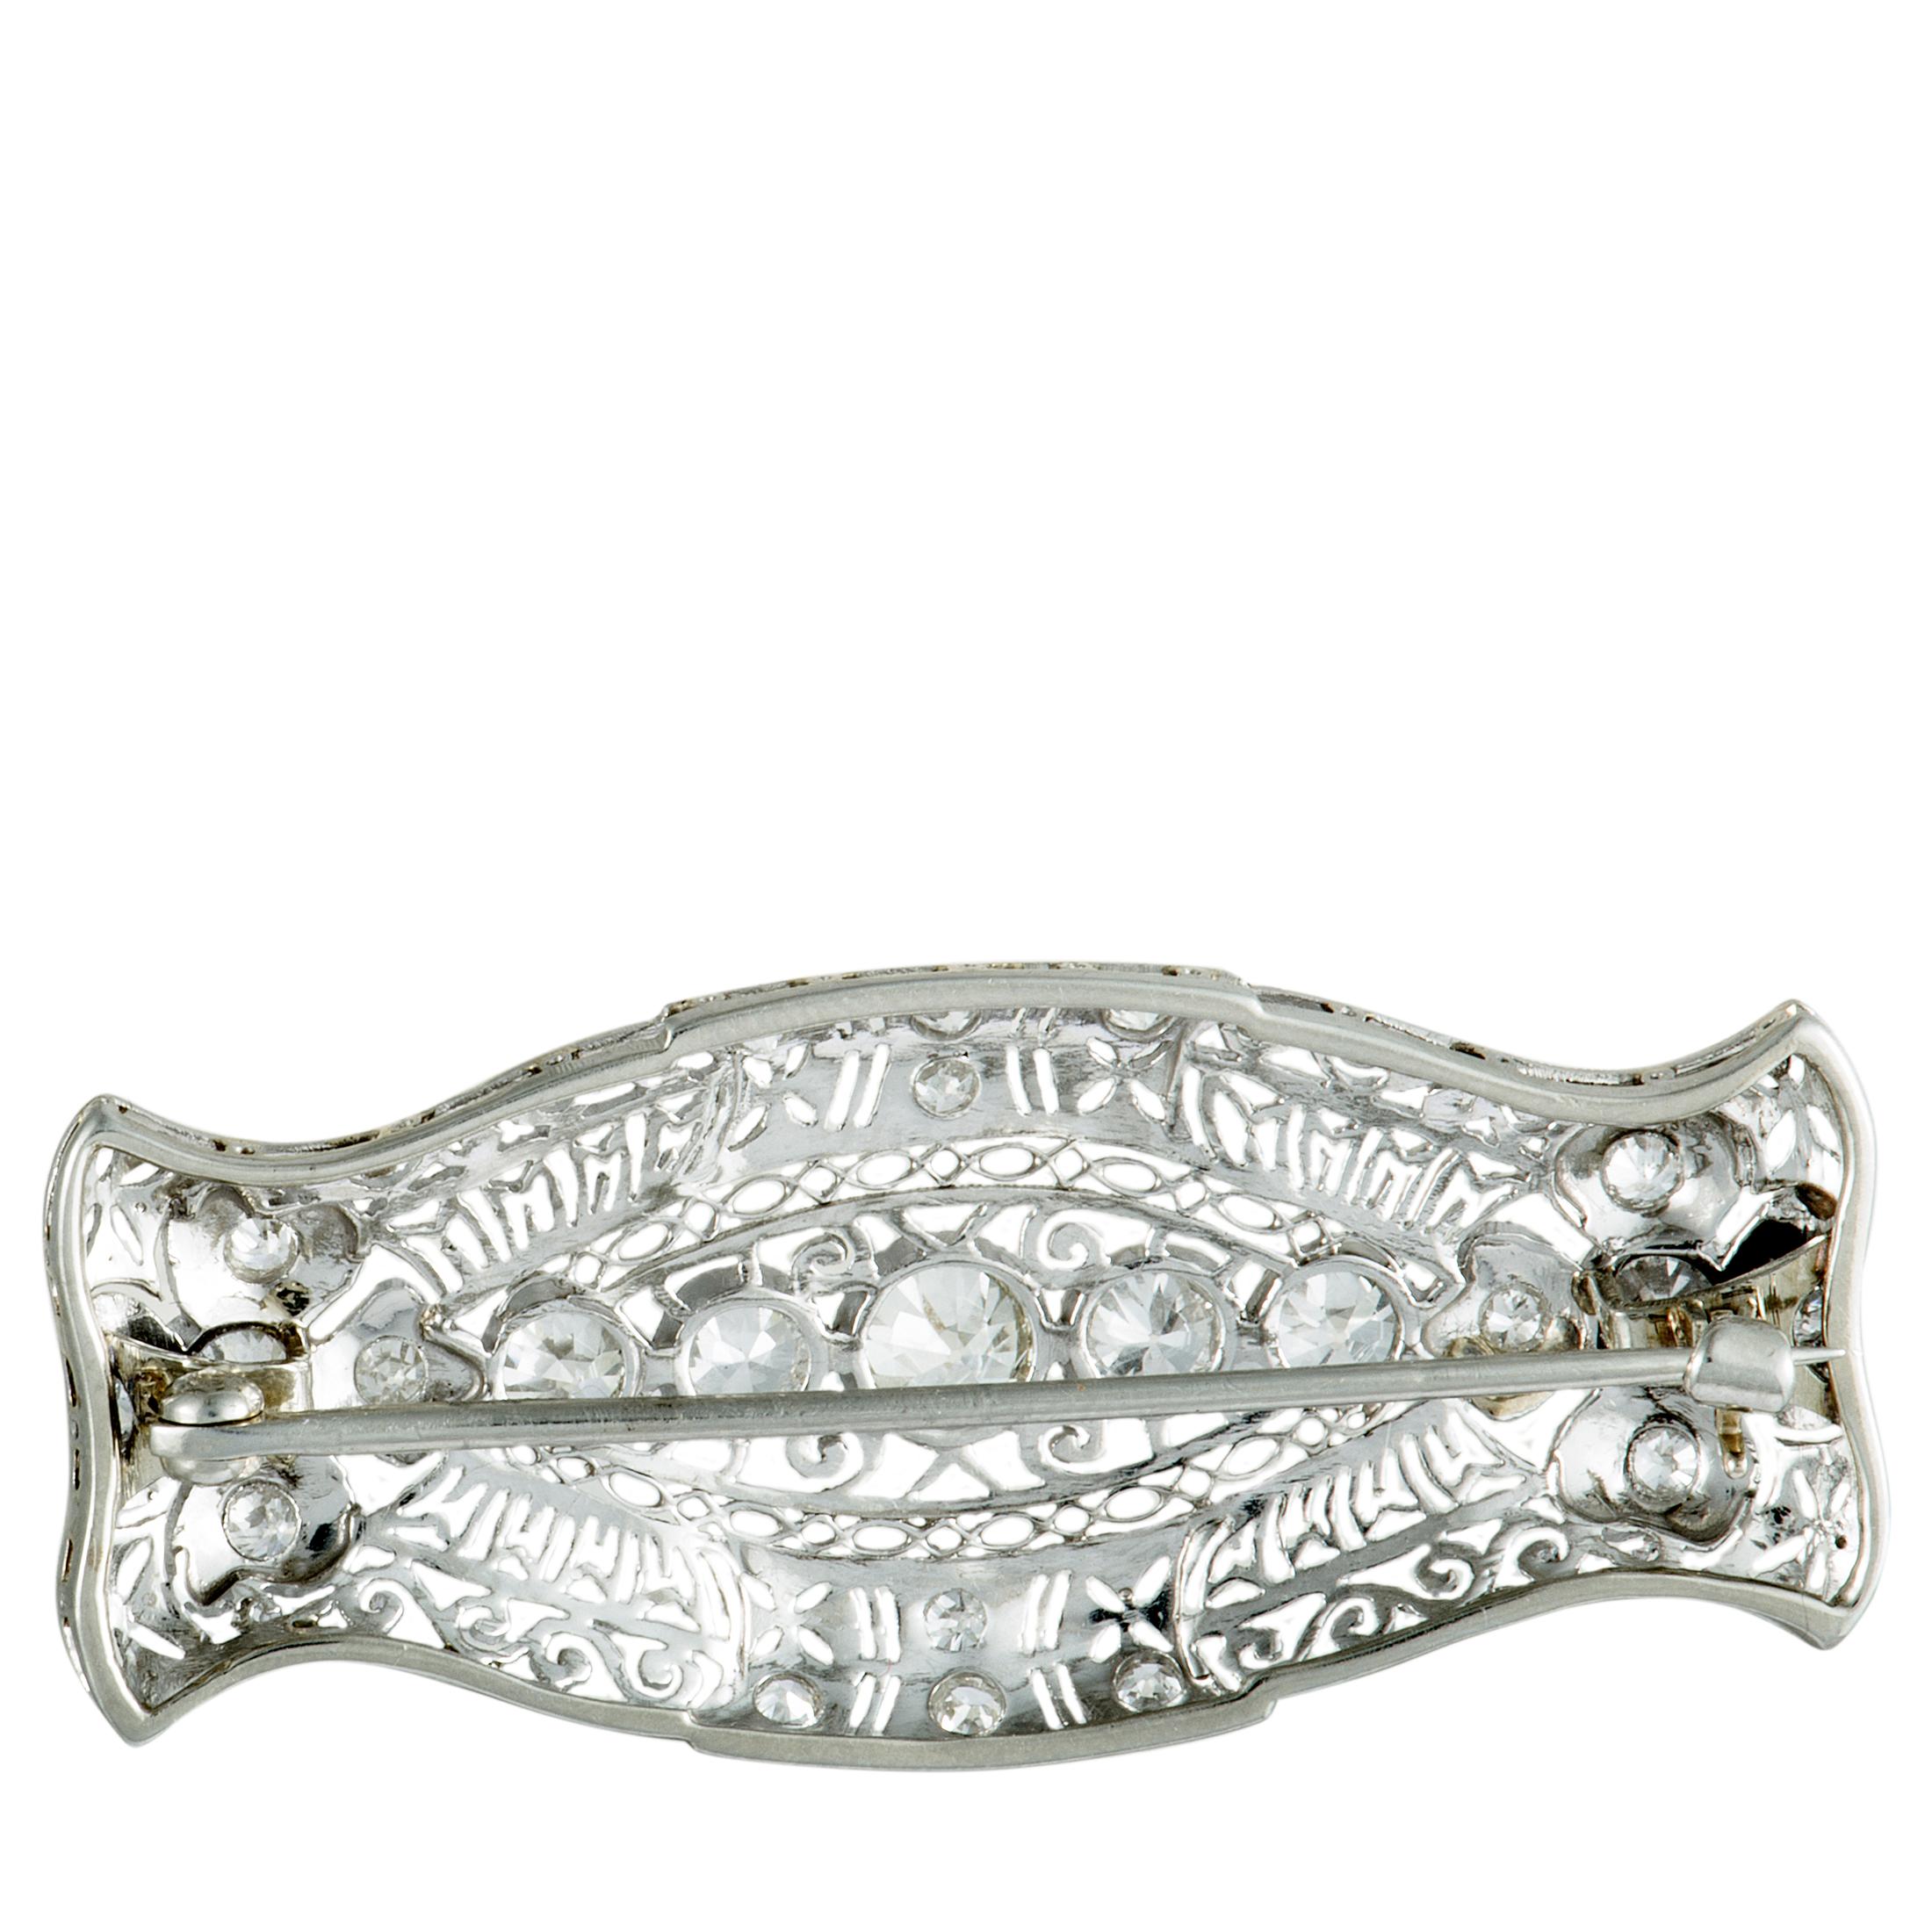 Boasting an exceptionally sophisticated design and superb craftsmanship quality, this wonderful brooch epitomizes timeless elegance and prestigious refinement. The brooch is beautifully made of platinum and it is embellished with irresistibly